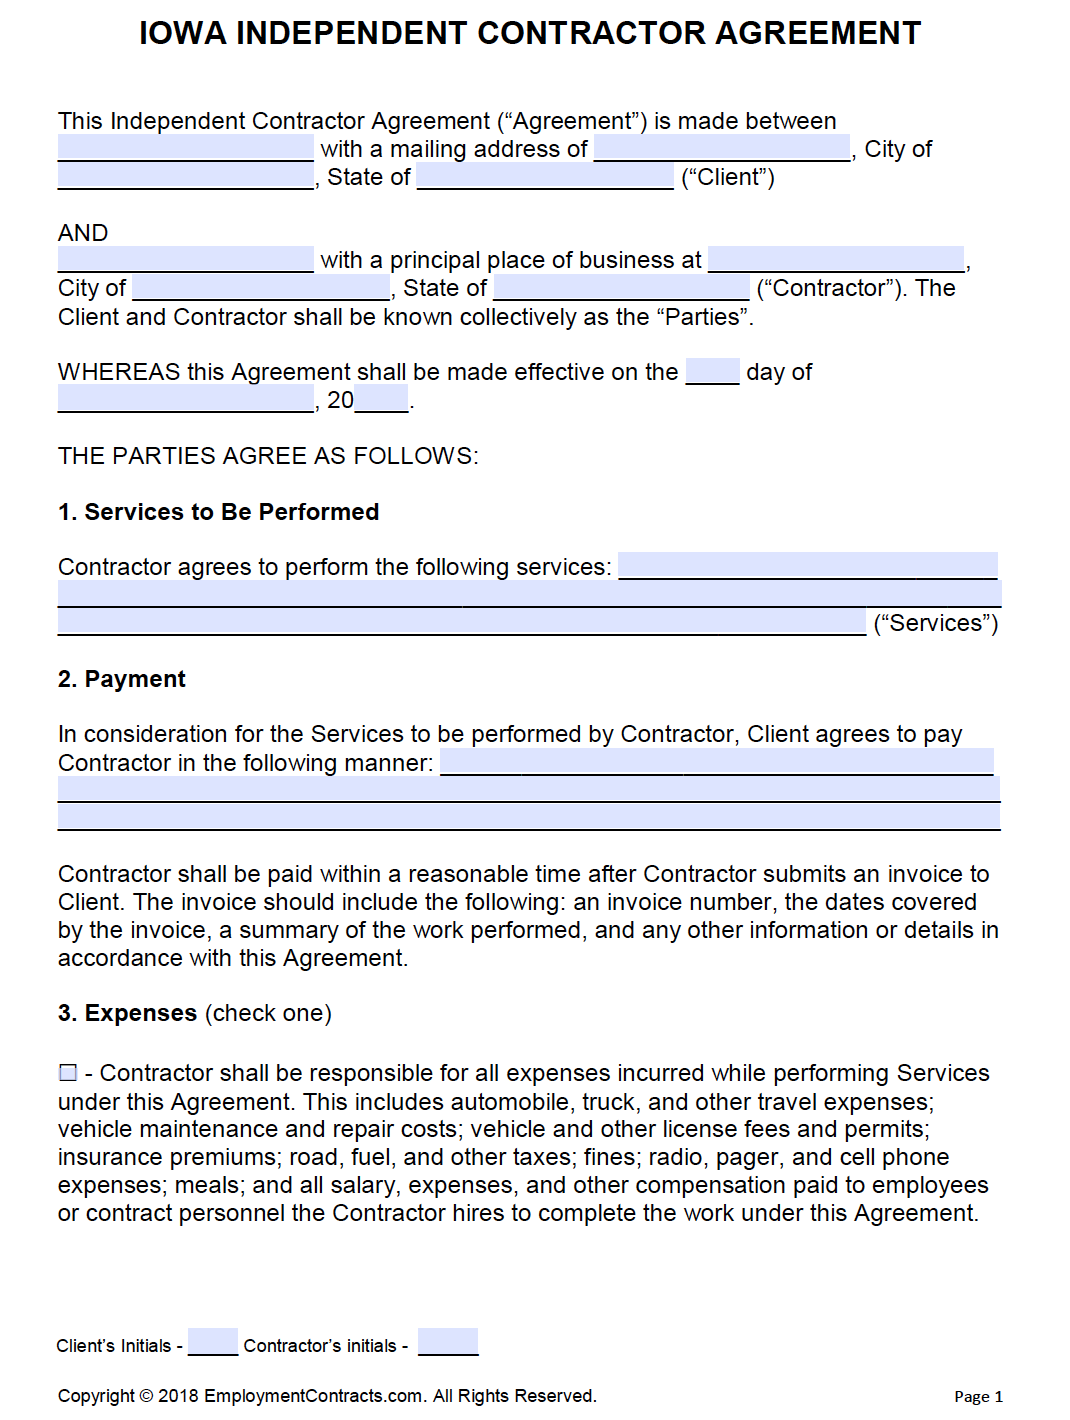 Free Iowa Independent Contractor Agreement PDF Word